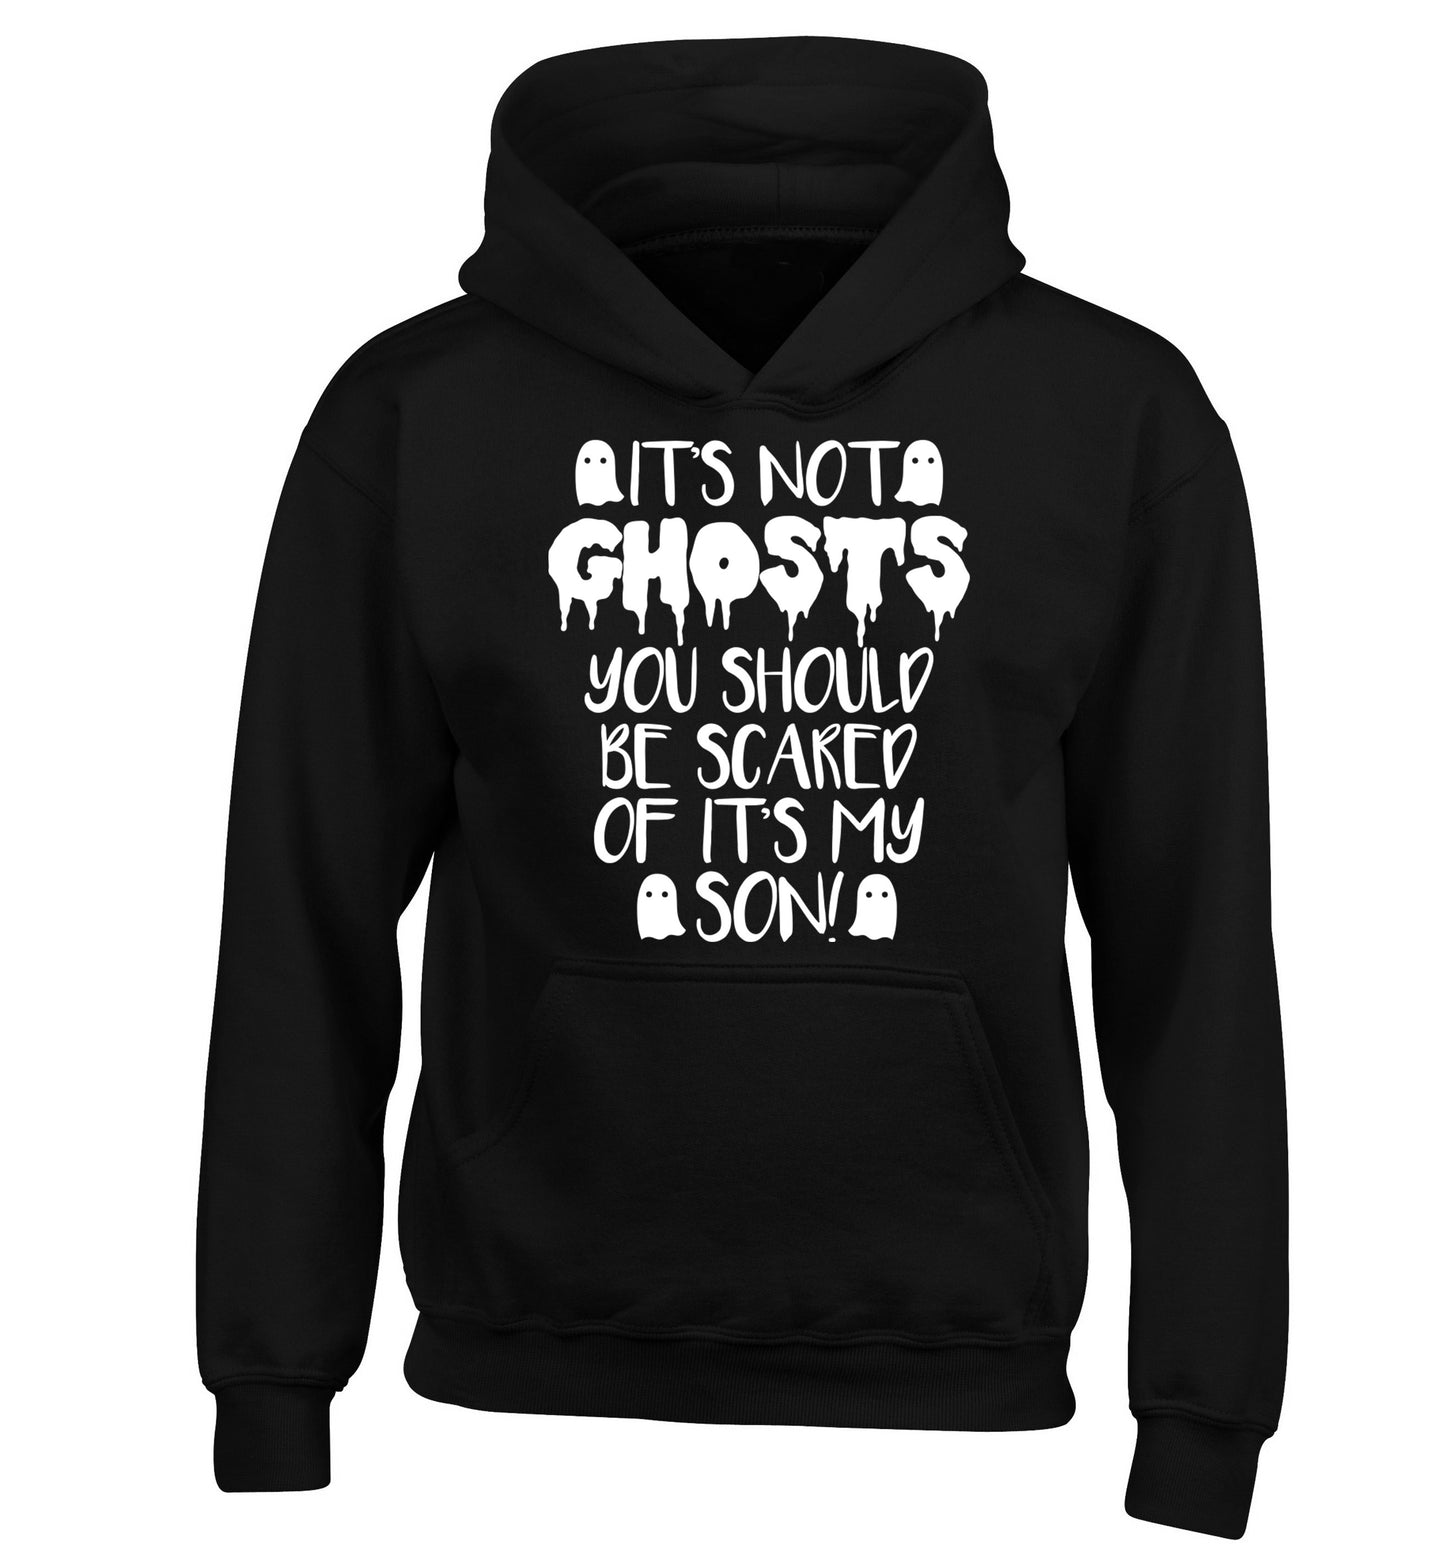 It's not ghosts you should be scared of it's my son! children's black hoodie 12-14 Years